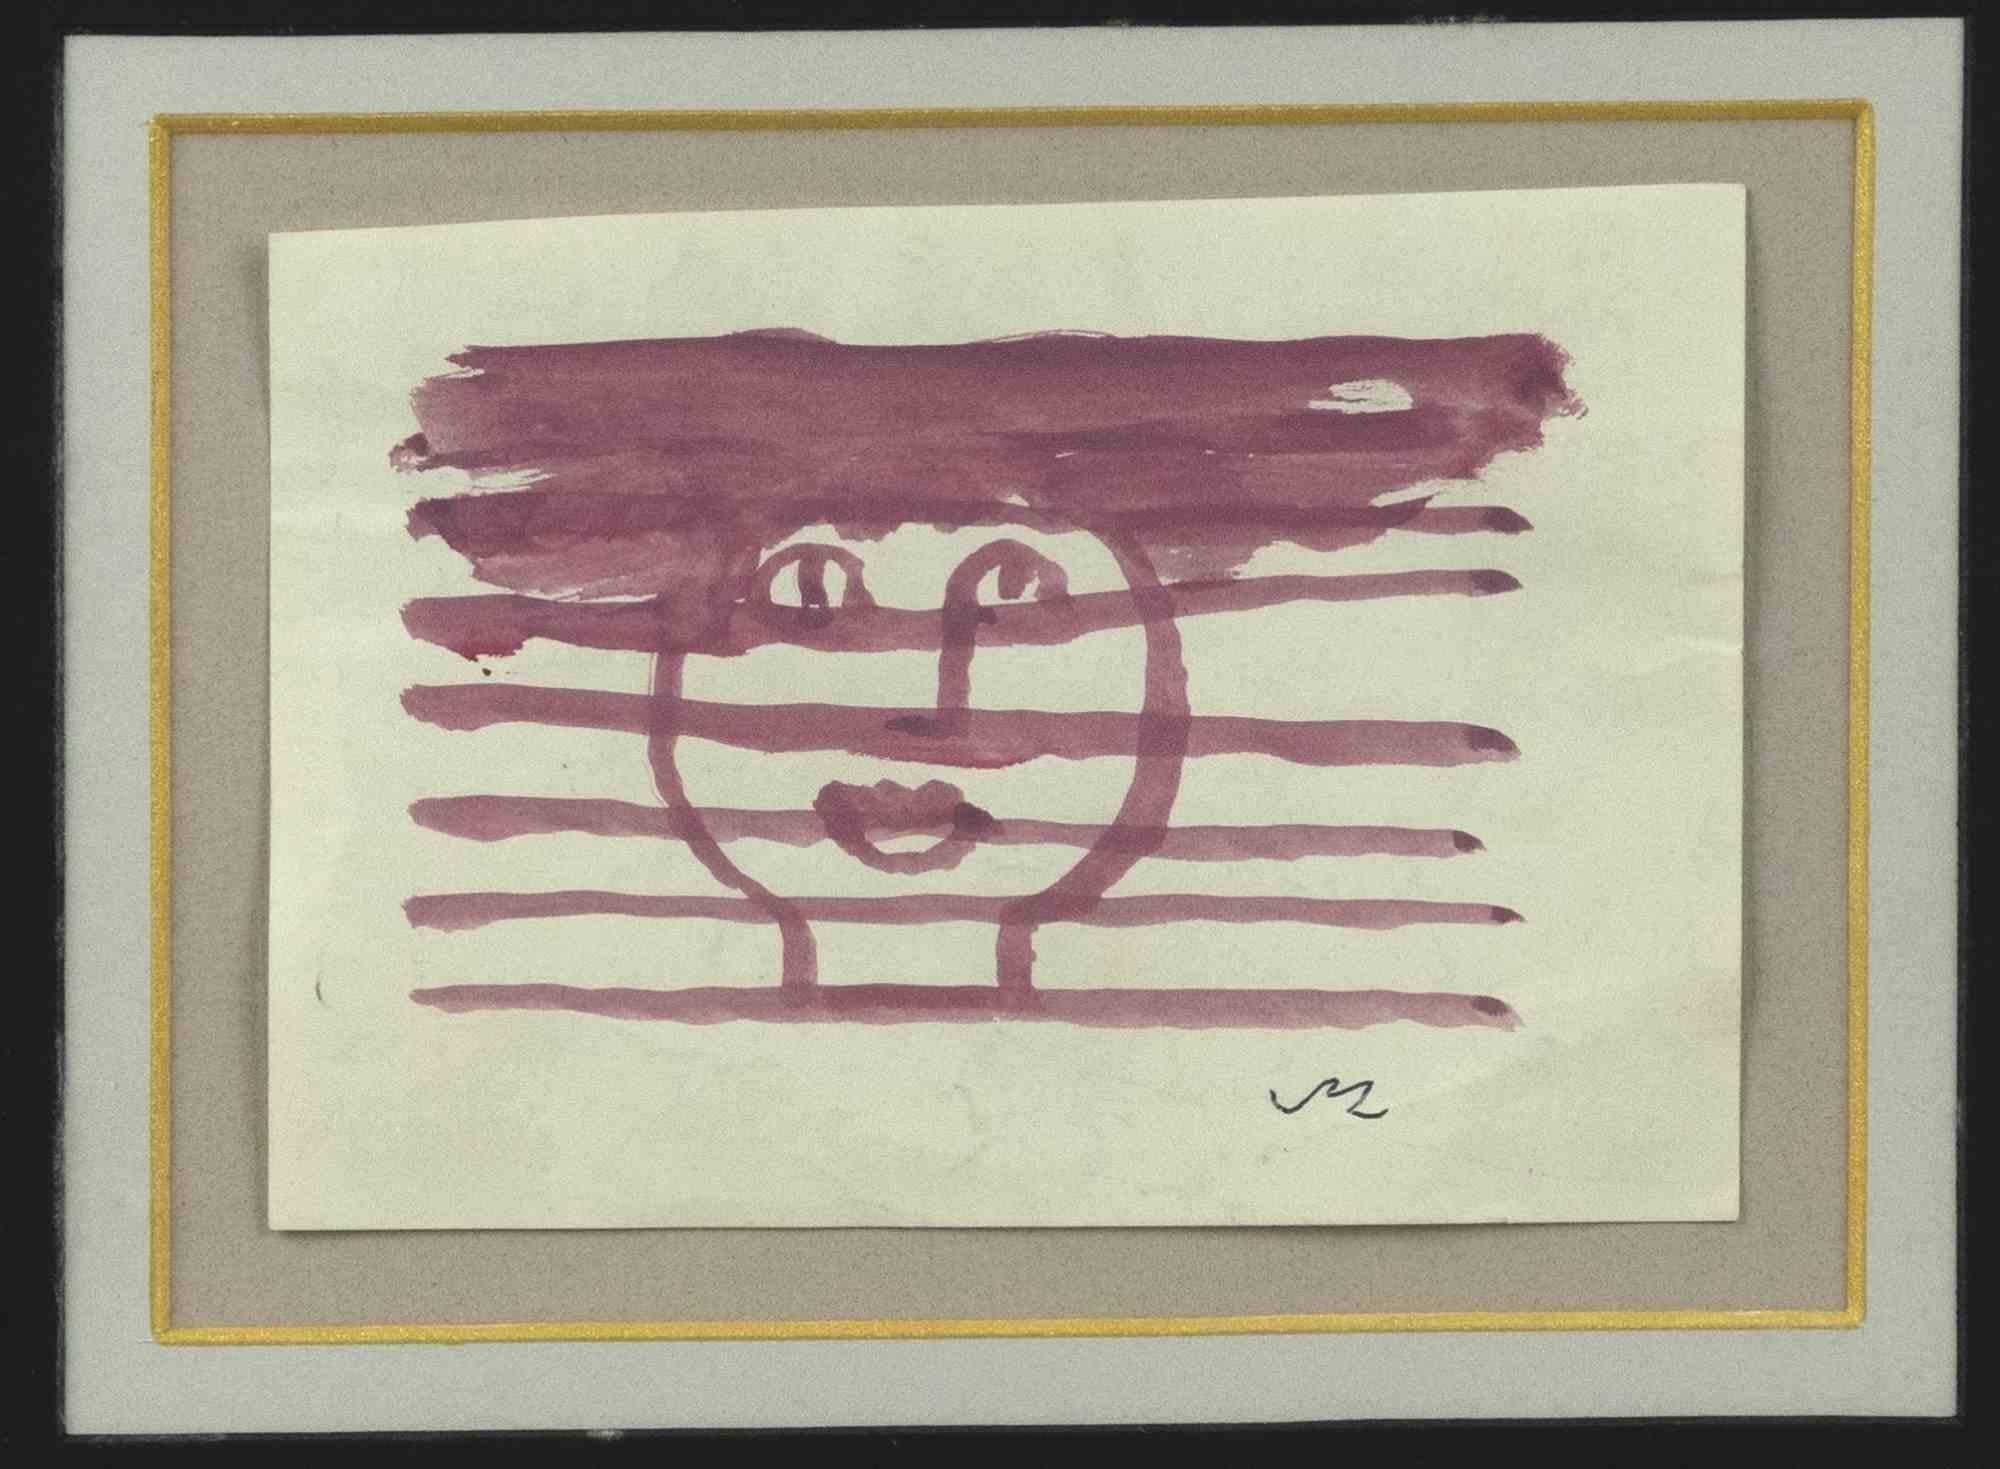 Face is a beautiful watercolour drawing realized by Mino Maccari in 1970.

The artwork is monogrammed by the artist on the lower right corner. In good condition except for some light folds and light stains. 

Includes frame (with some minor